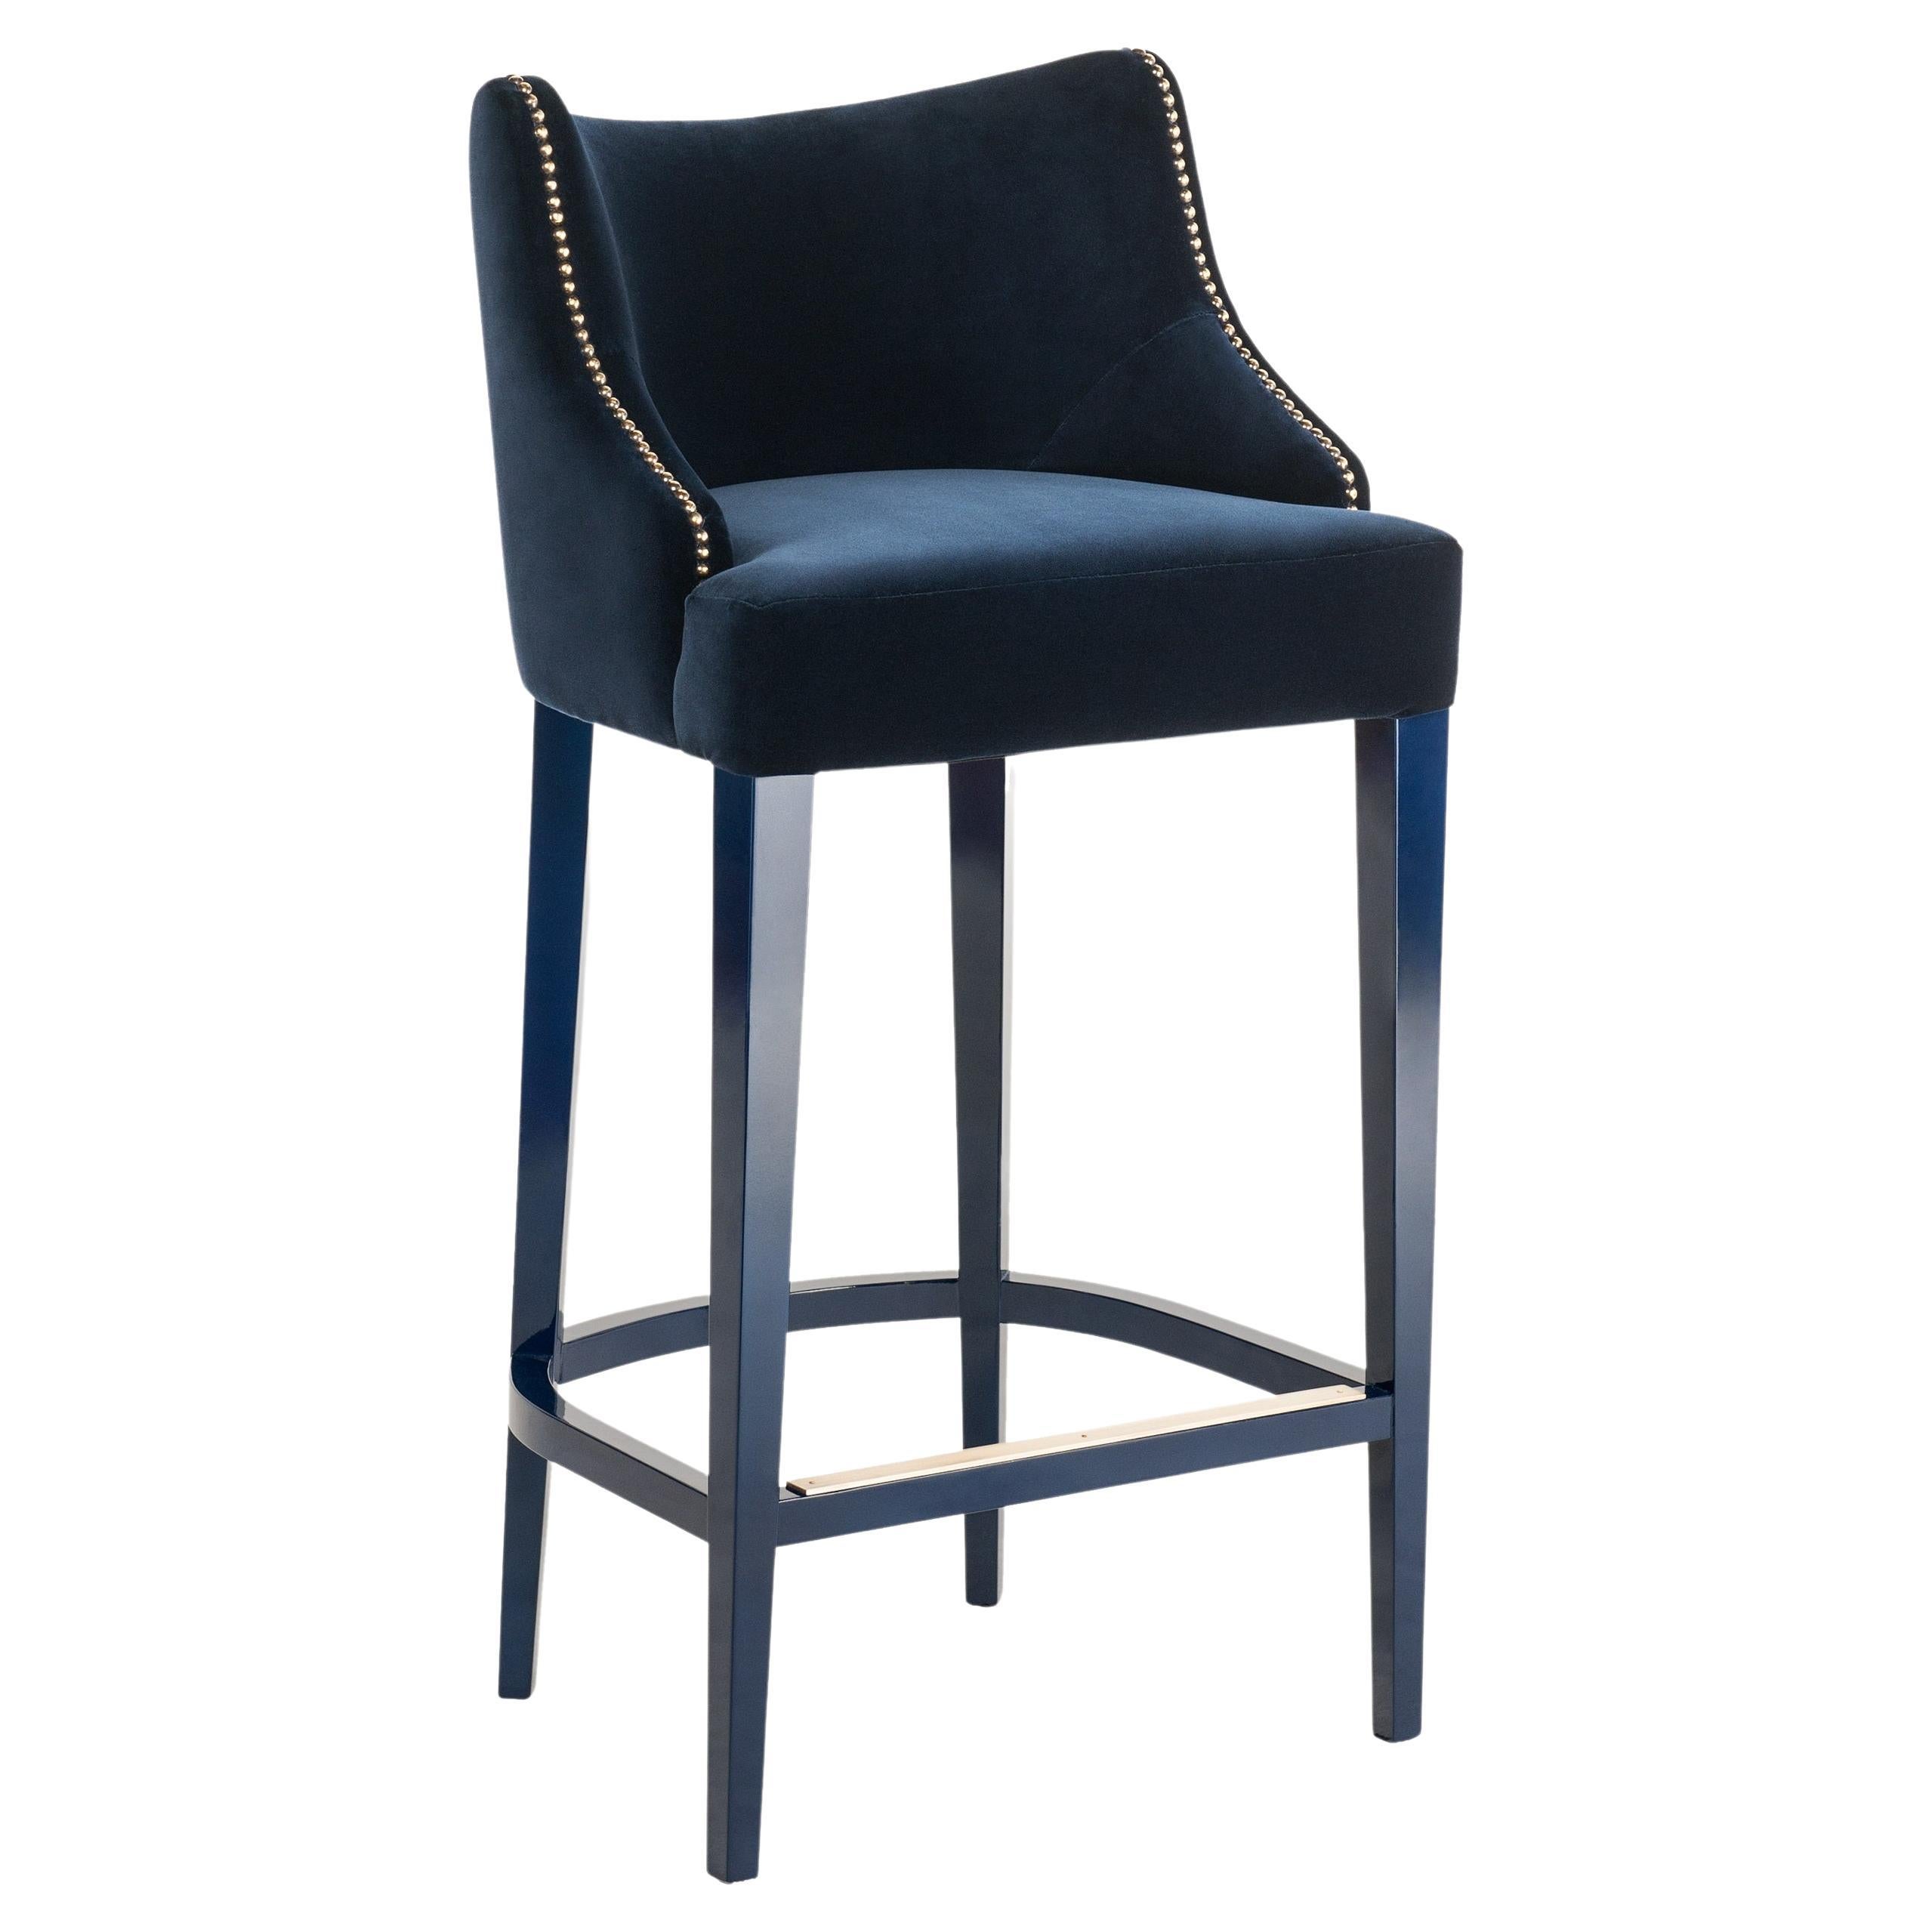 Contemporary Barstool Offered with Nails on the Curve & Back